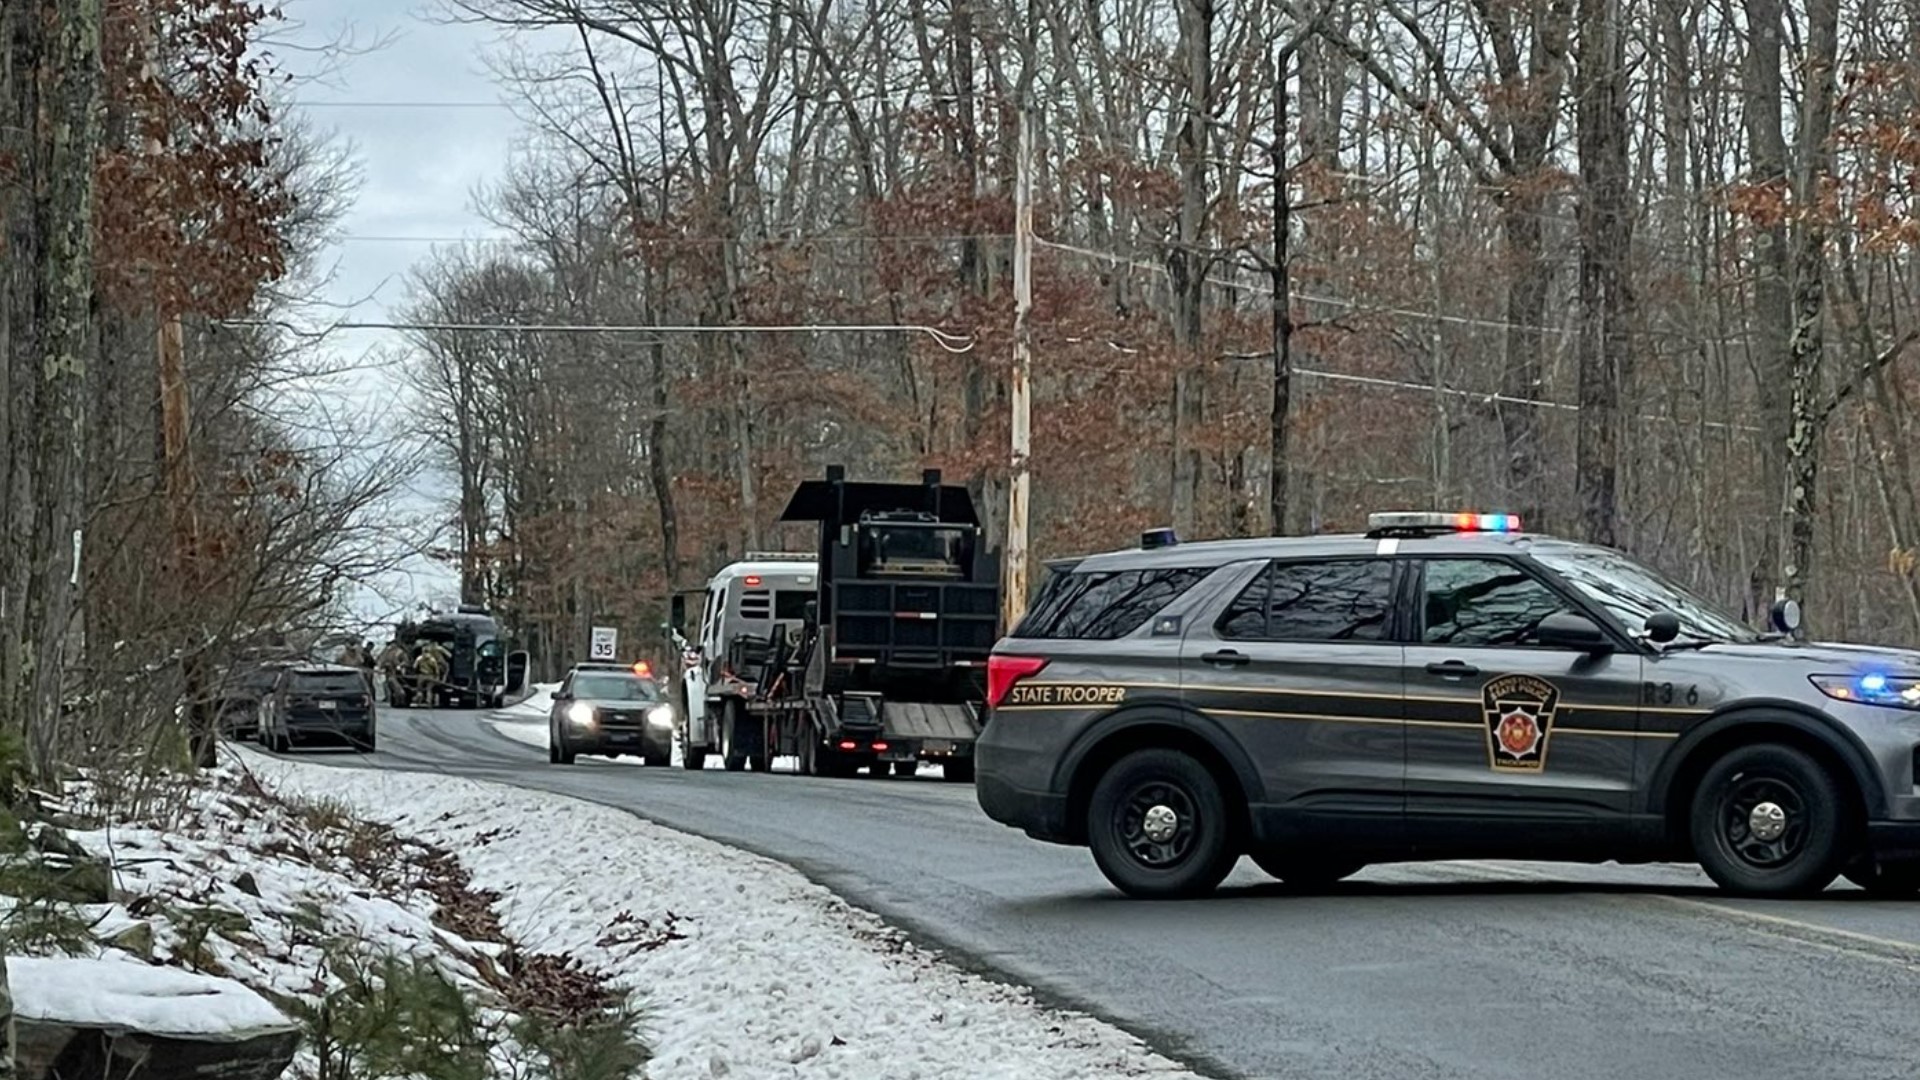 The incident began when officers attempted to serve a warrant in Paupack Township, near Hawley.